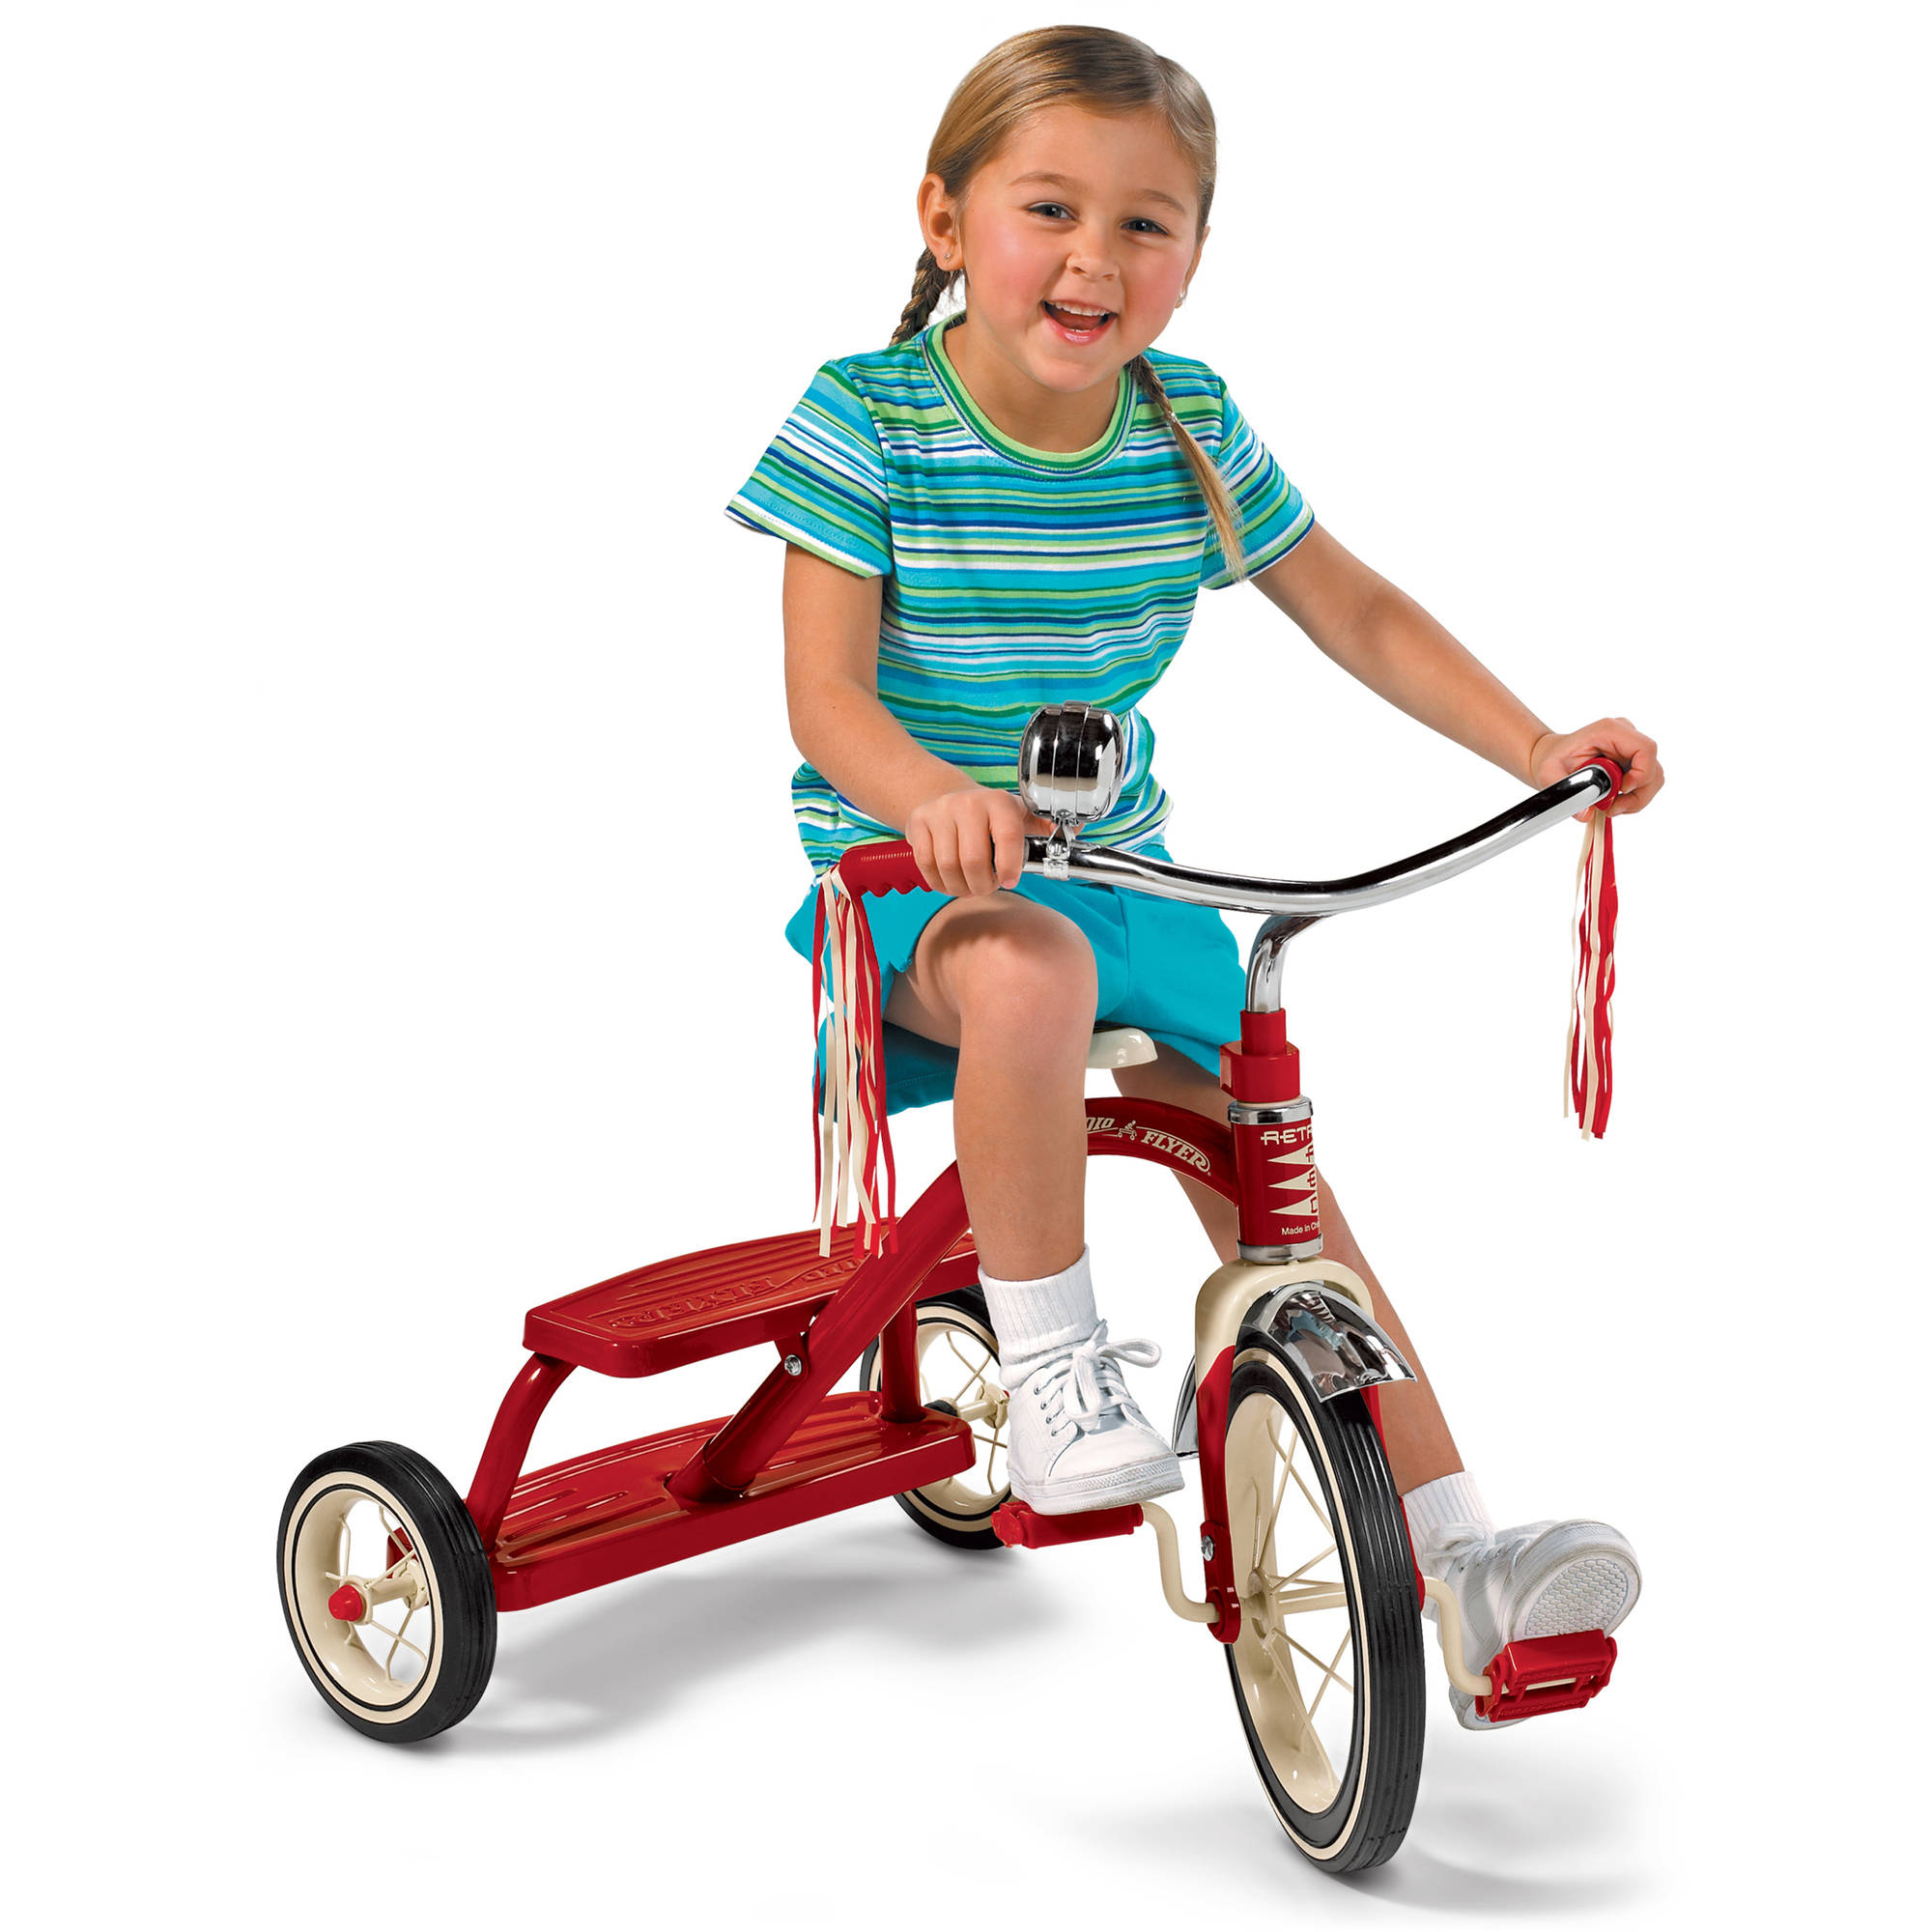 Radio Flyer, Classic Red Dual Deck Tricycle, 12" Front Wheel, Red - image 4 of 9